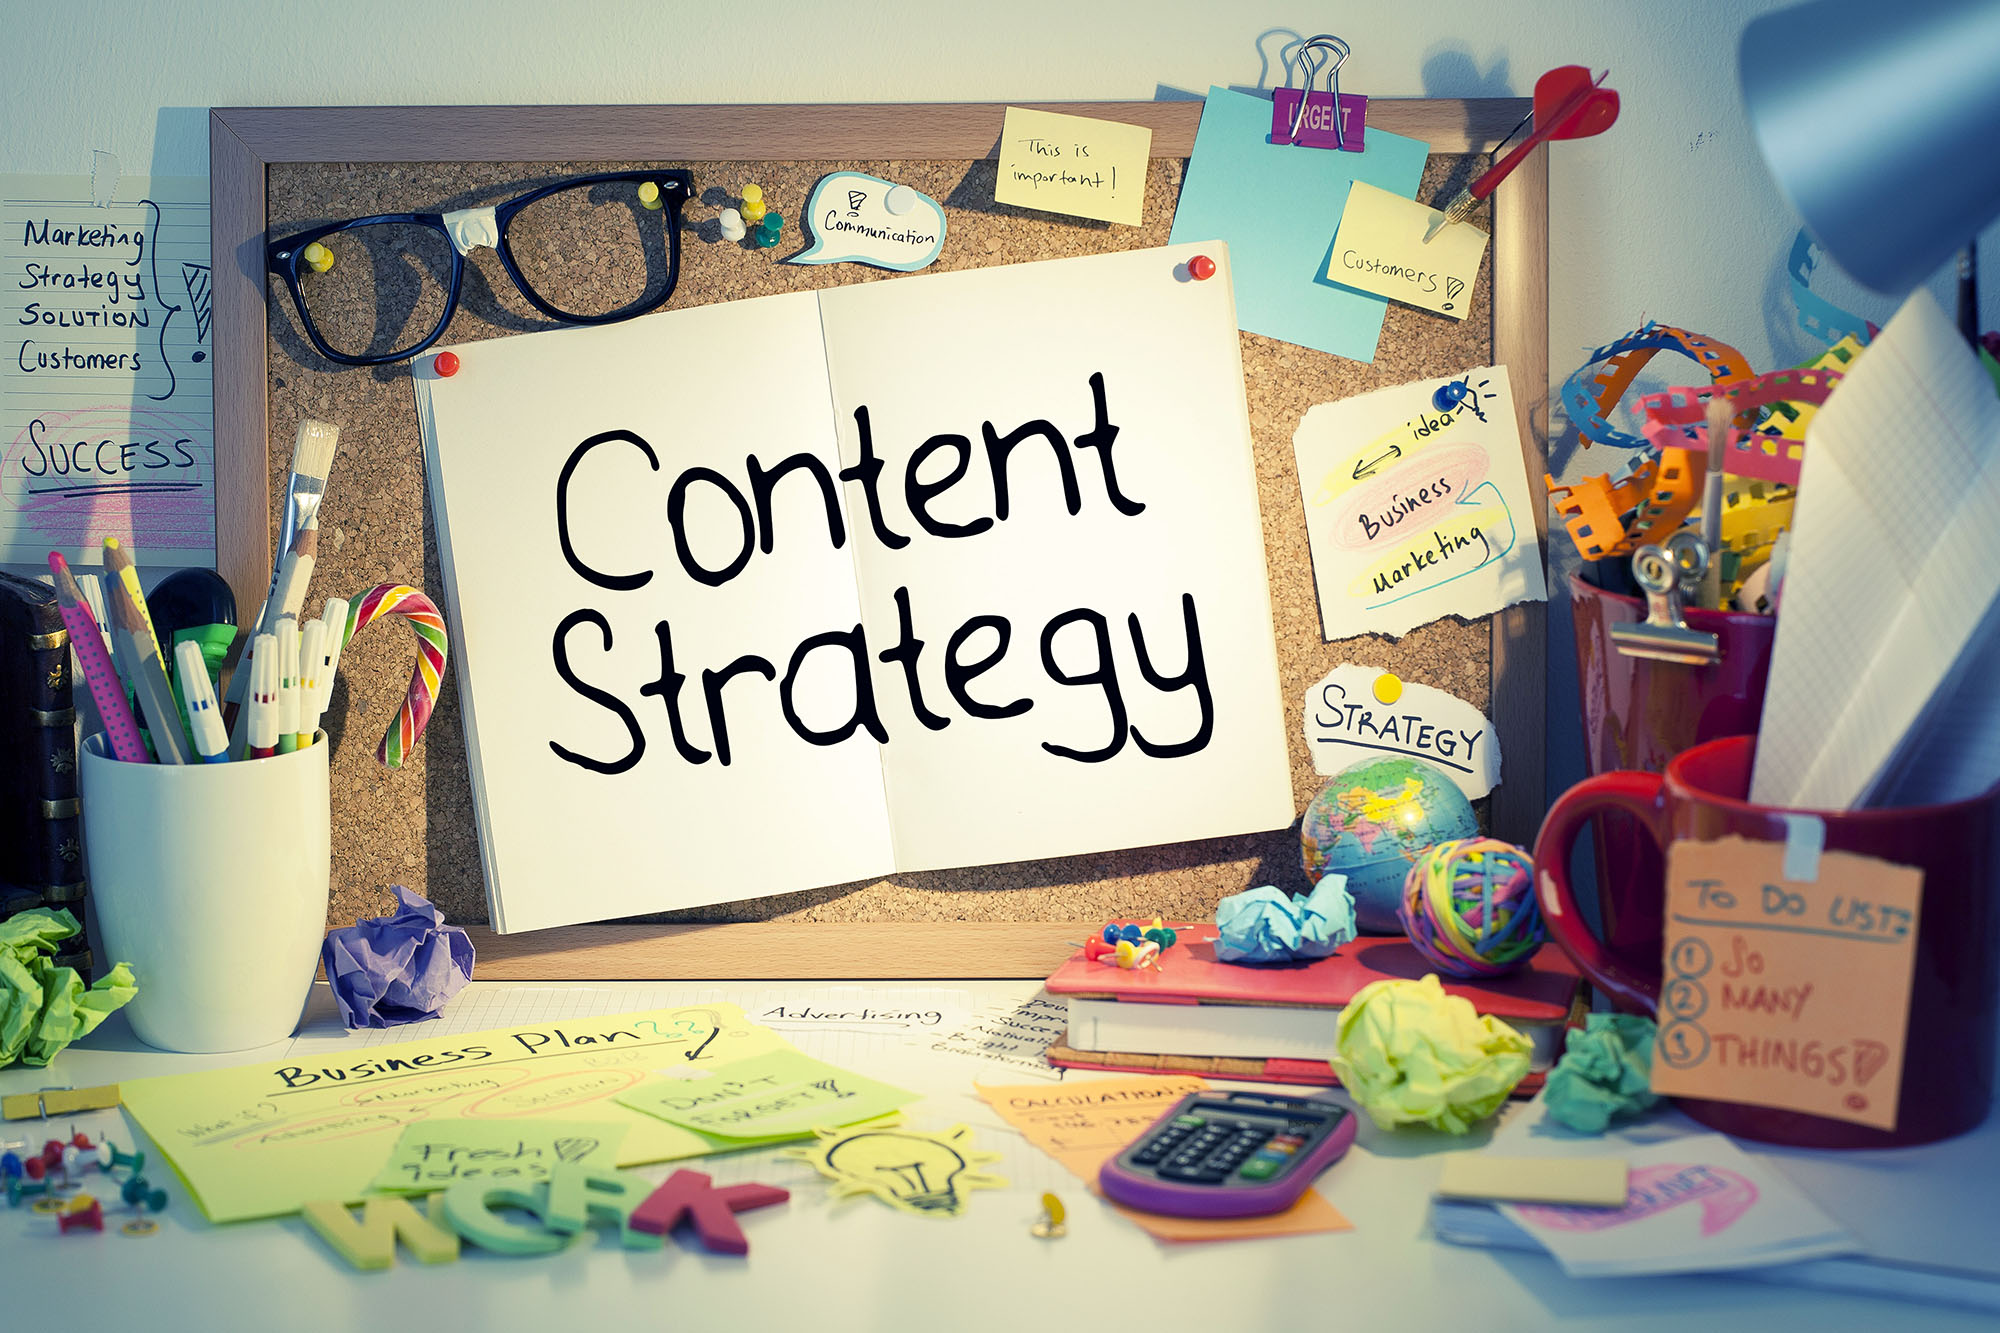 The Fundamentals of Content Marketing: What Small Businesses Need to Know